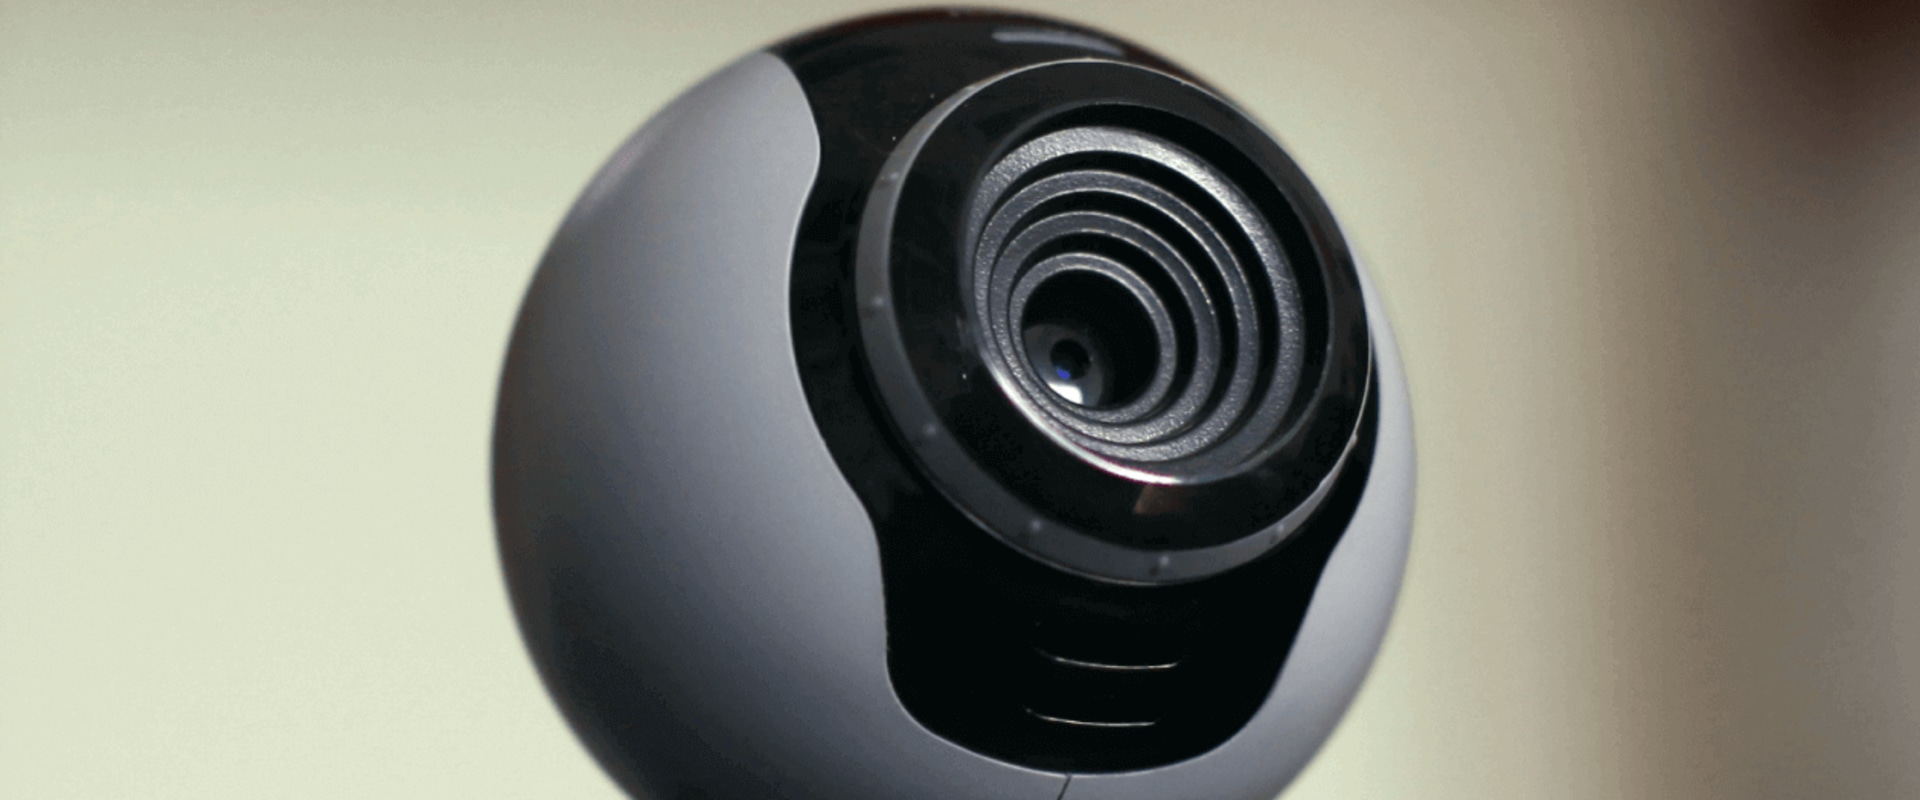 Understanding Wi-Fi Compatibility: Features & Benefits of Webcams